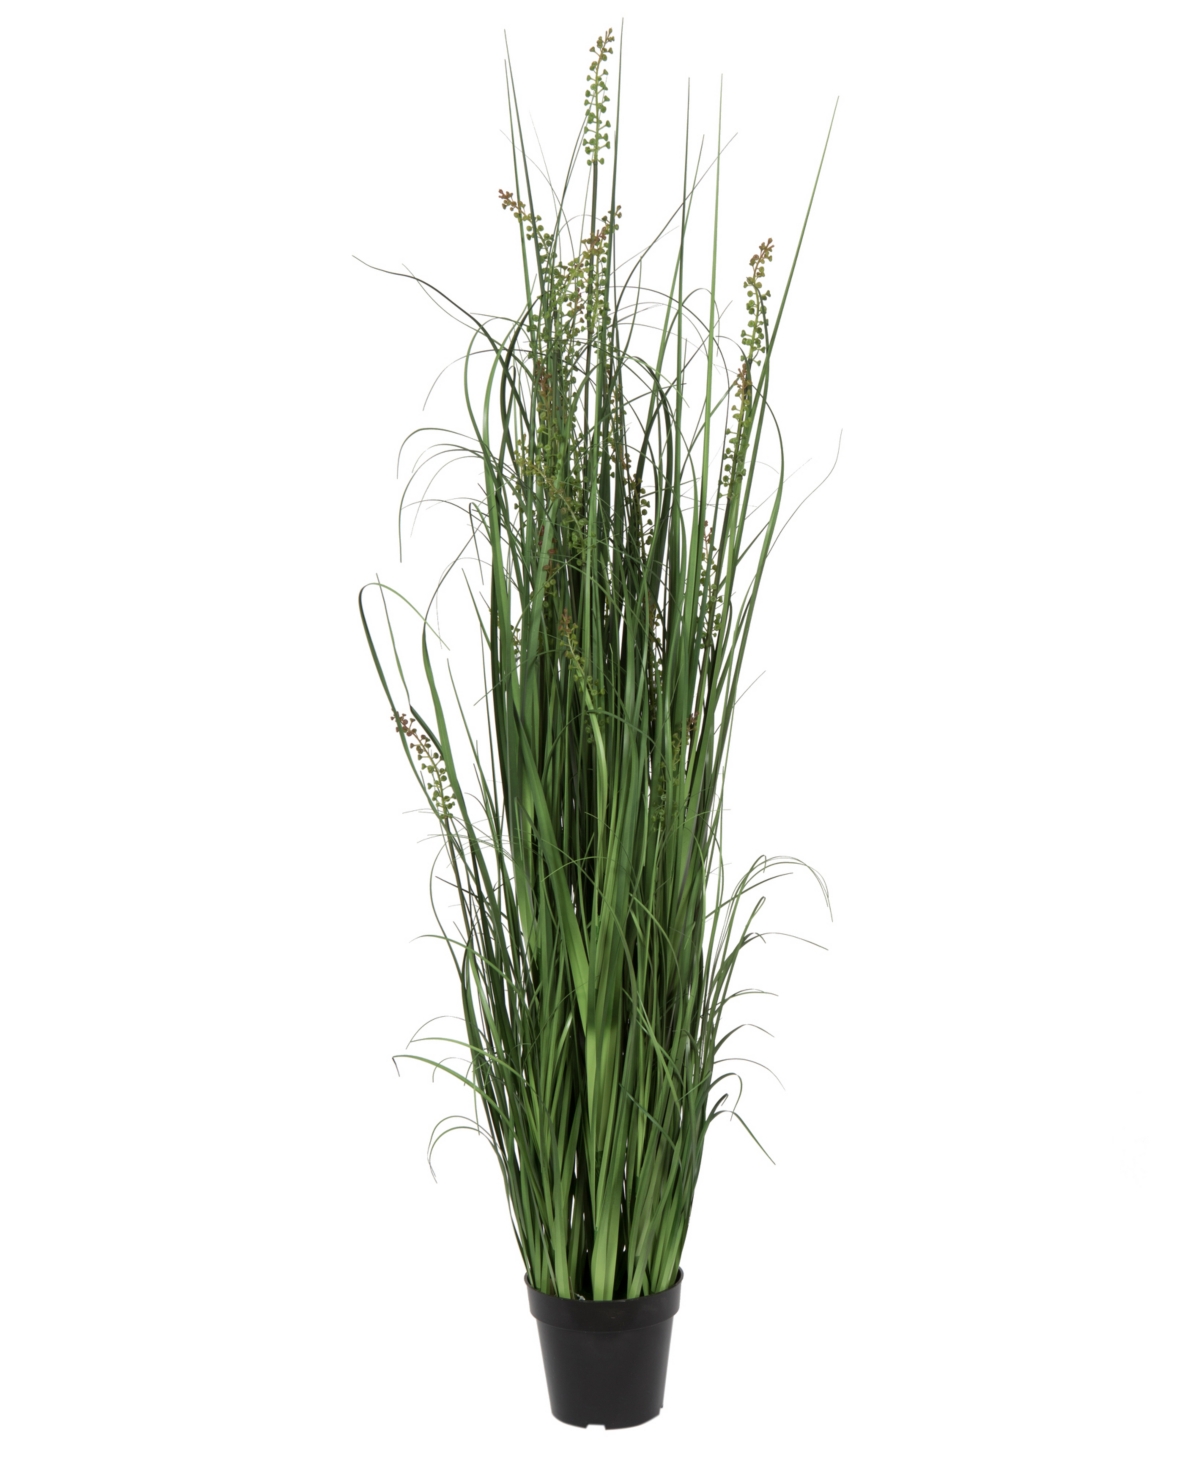 Vickerman 60" Pvc Artificial Potted Green Sheep's Grass And Plastic Grass In No Color